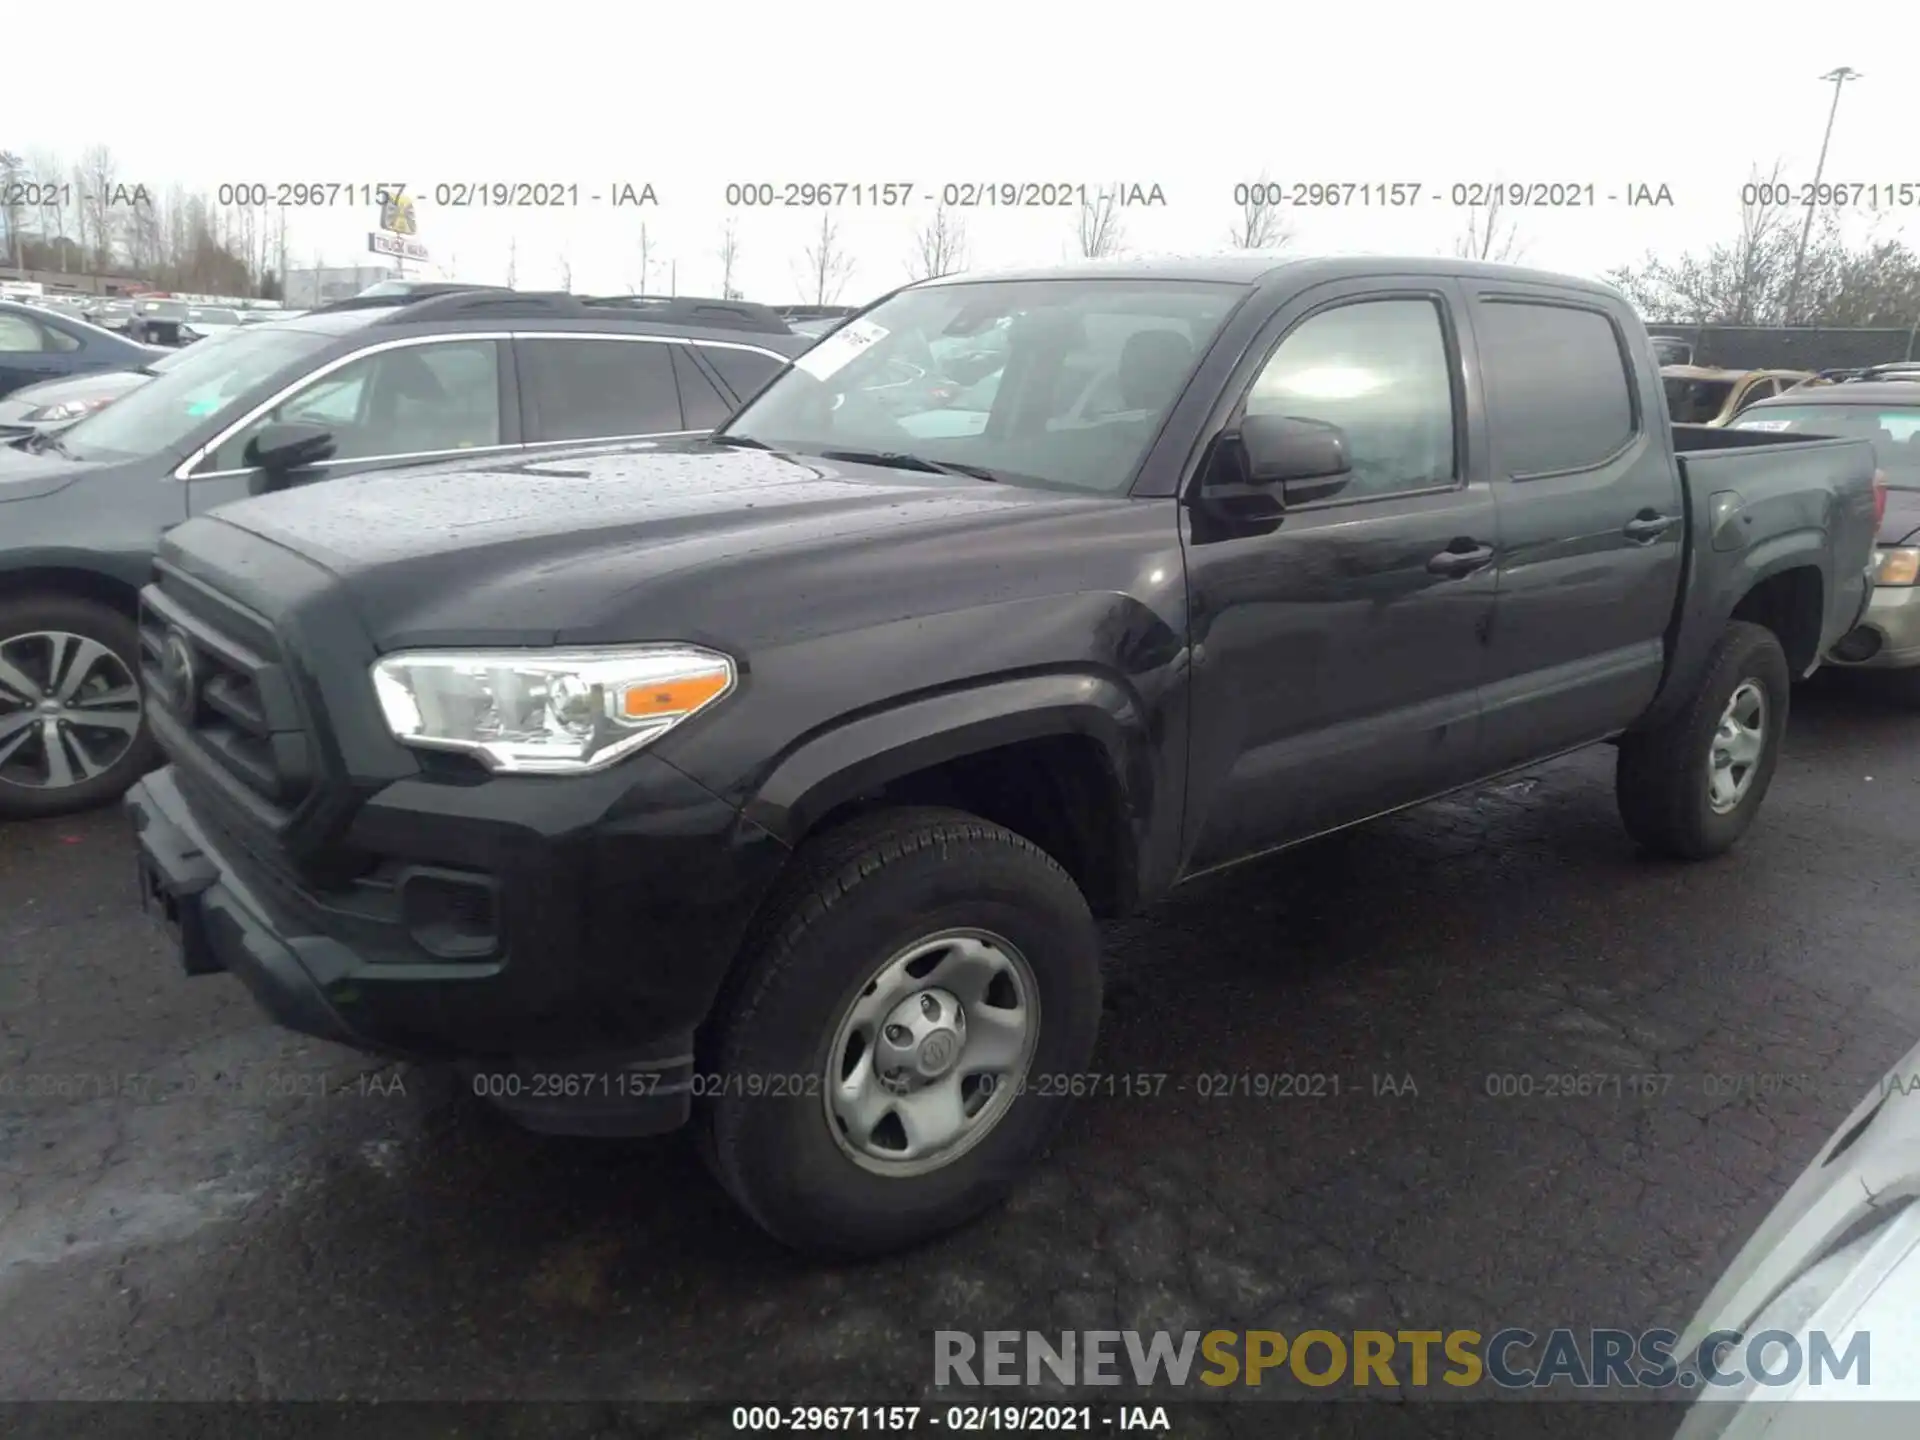 2 Photograph of a damaged car 3TMCZ5ANXLM328540 TOYOTA TACOMA 4WD 2020